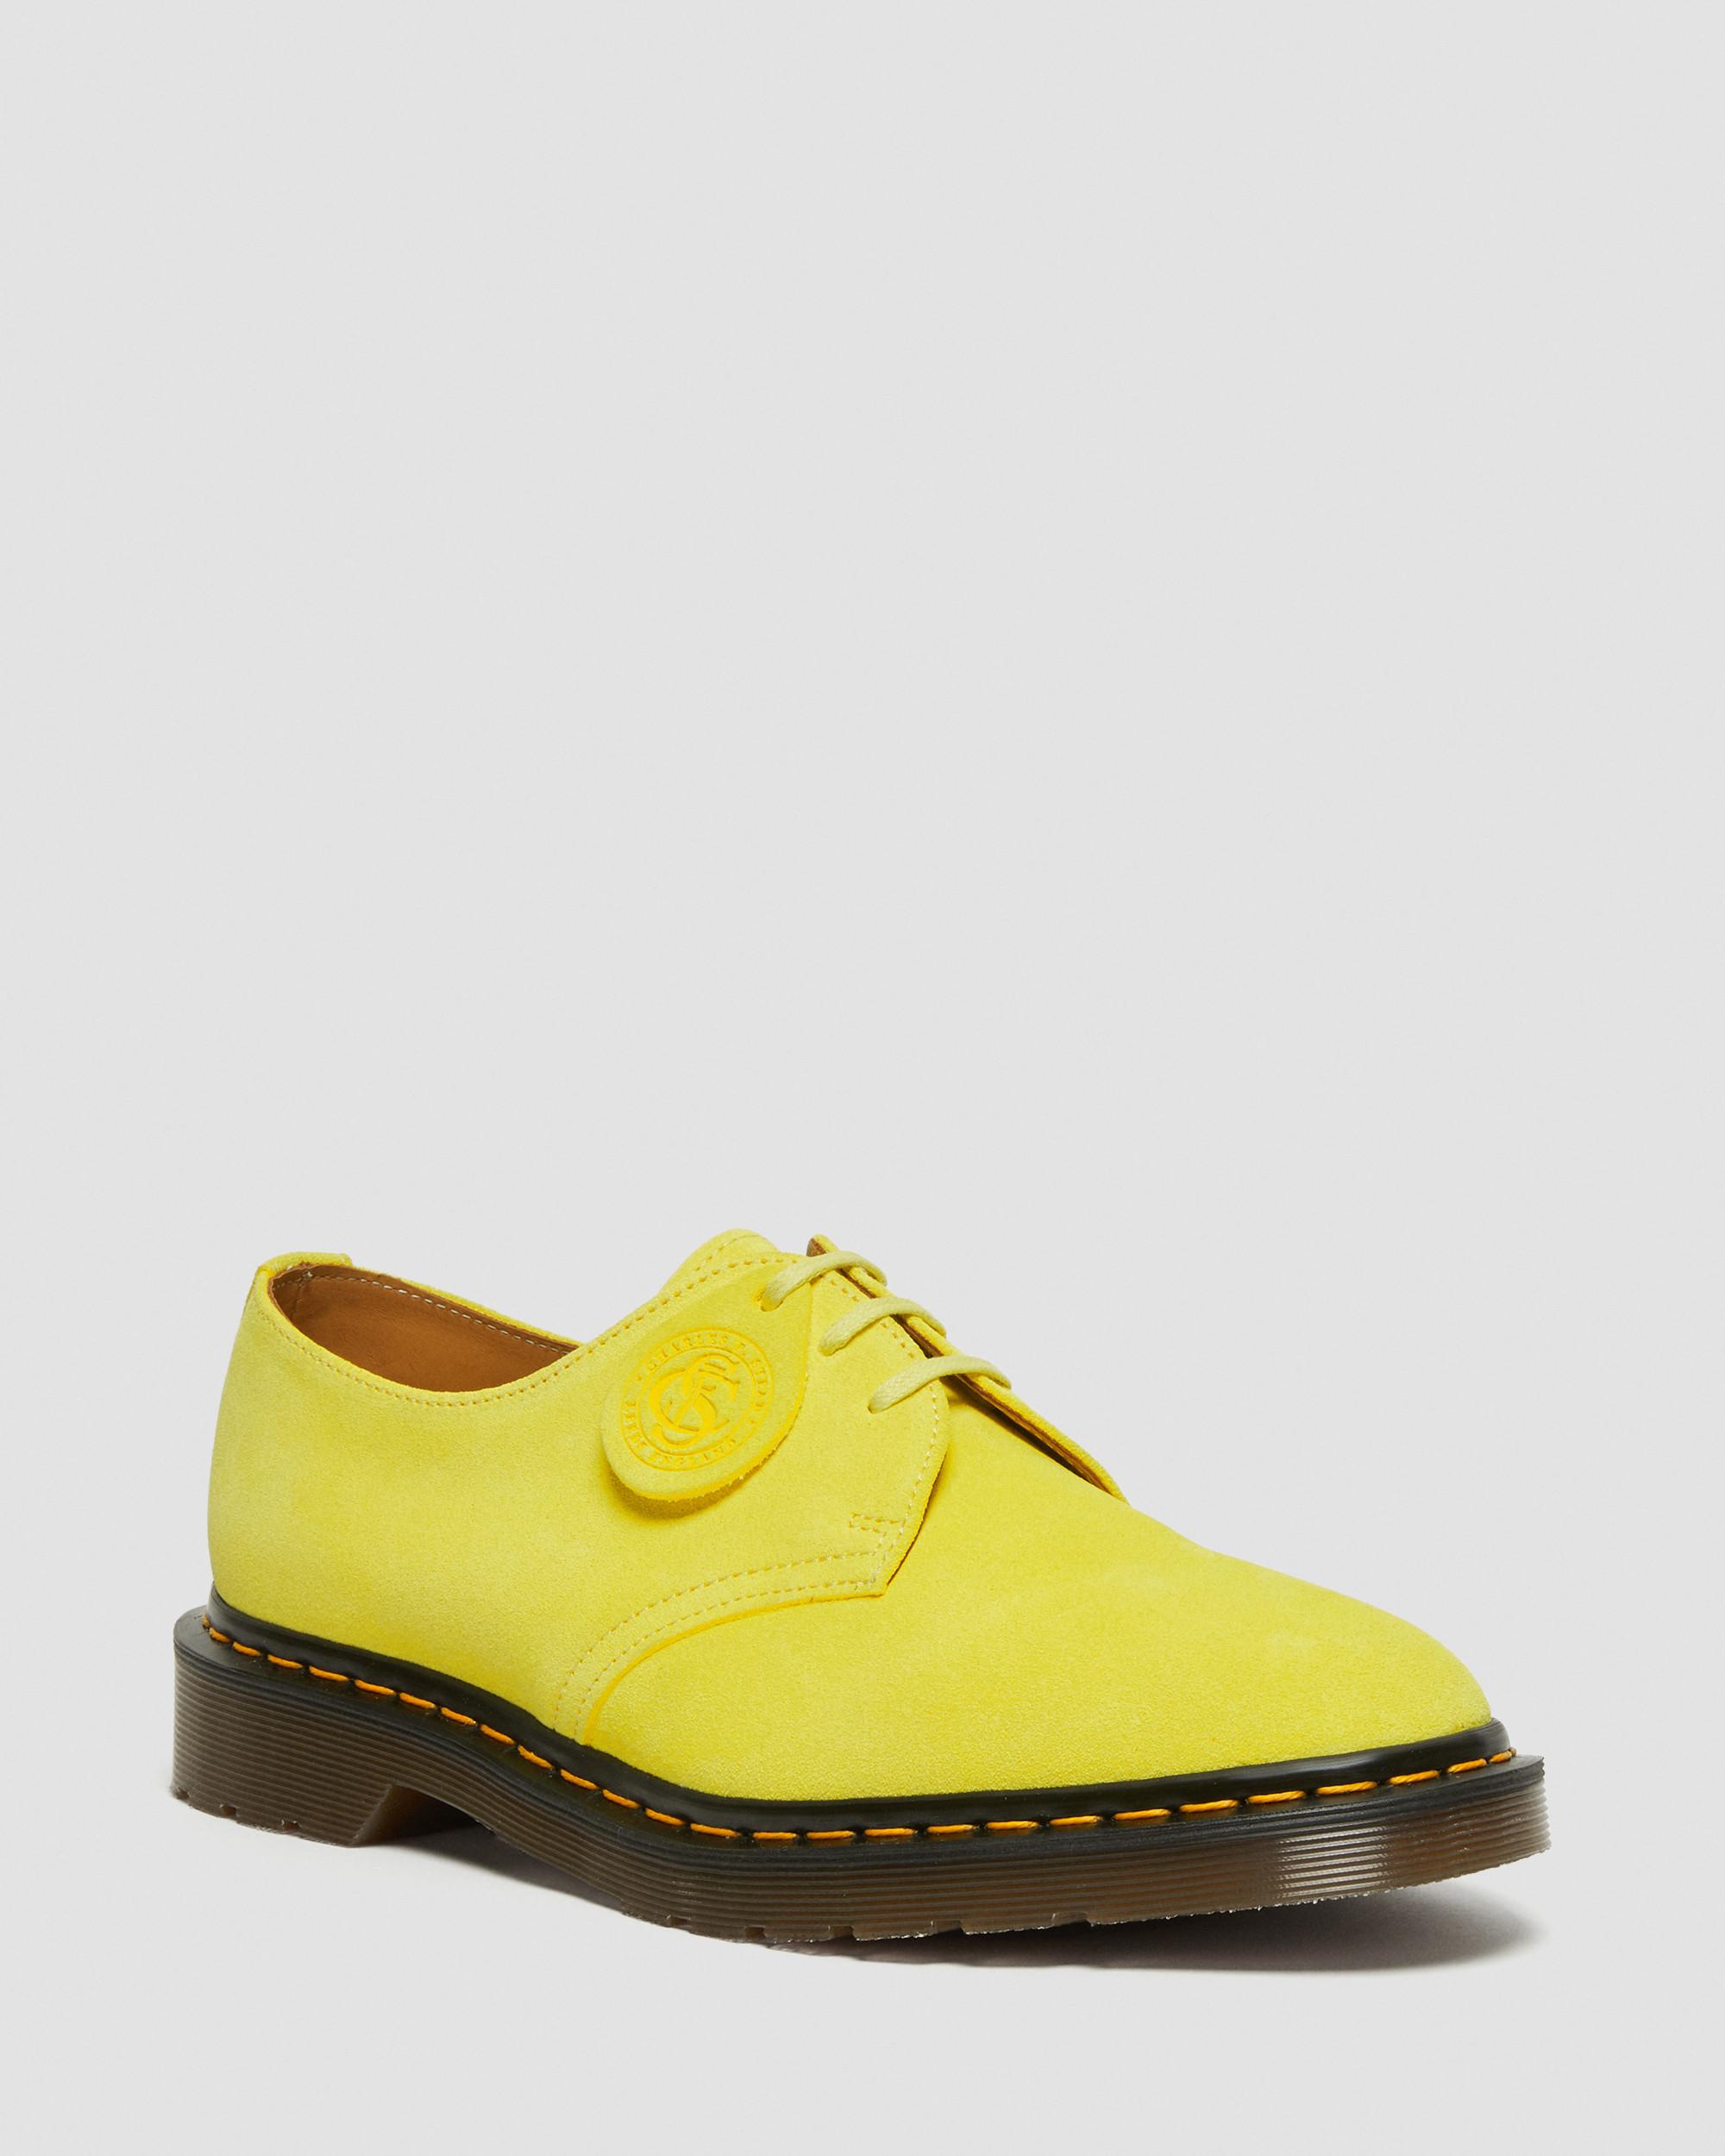 1461 Made in England Buck Suede Shoes in Yellow | Dr. Martens